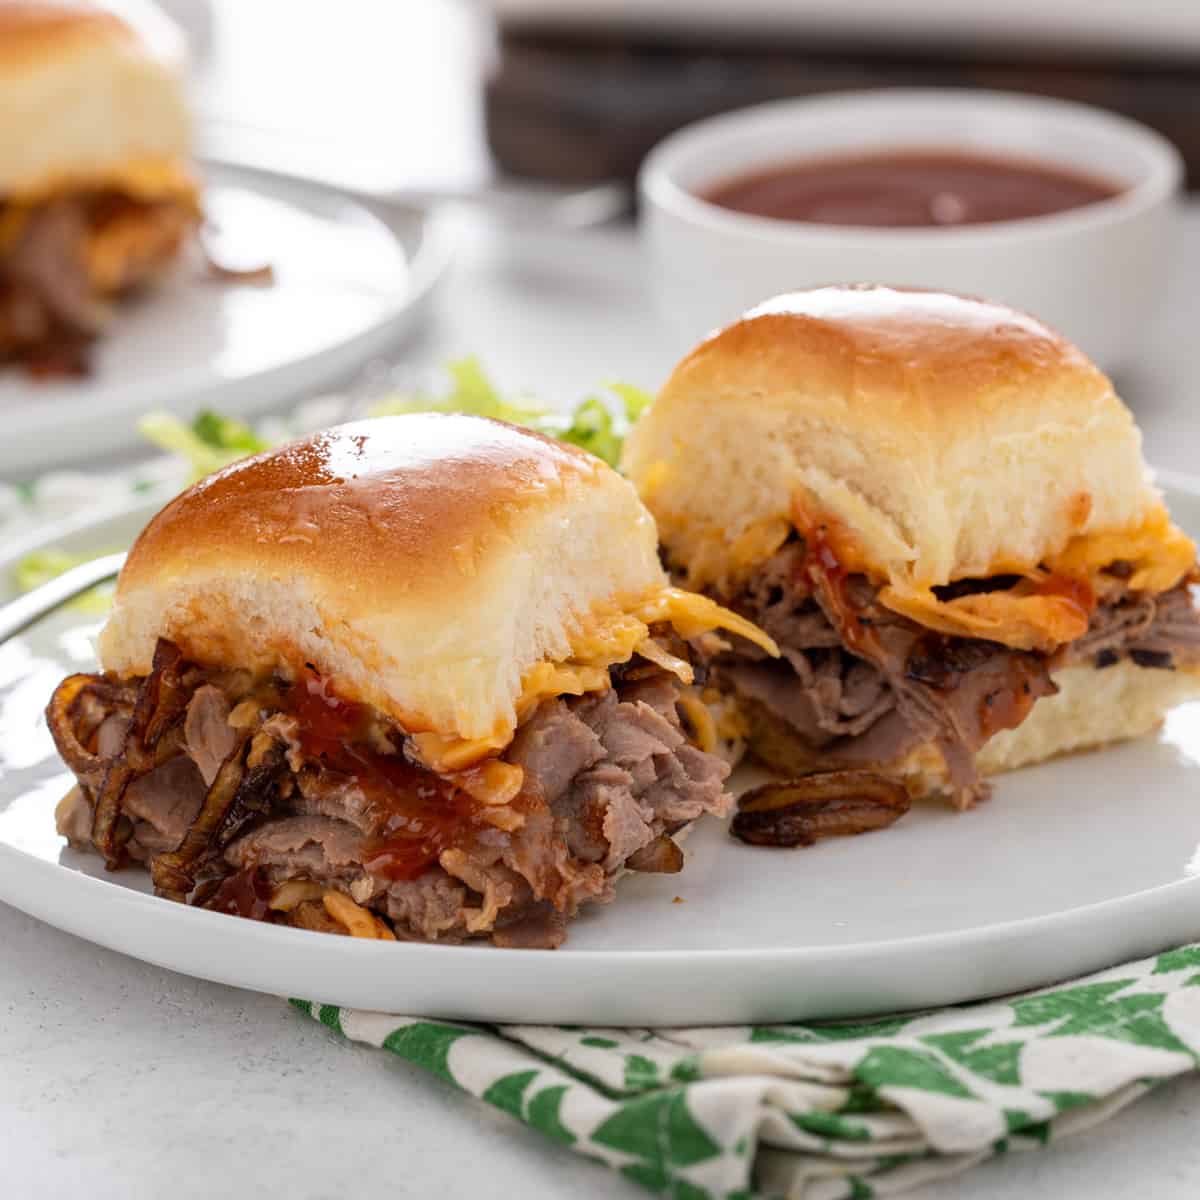 50 of the Best Slider Recipes in the World - Insanely Good